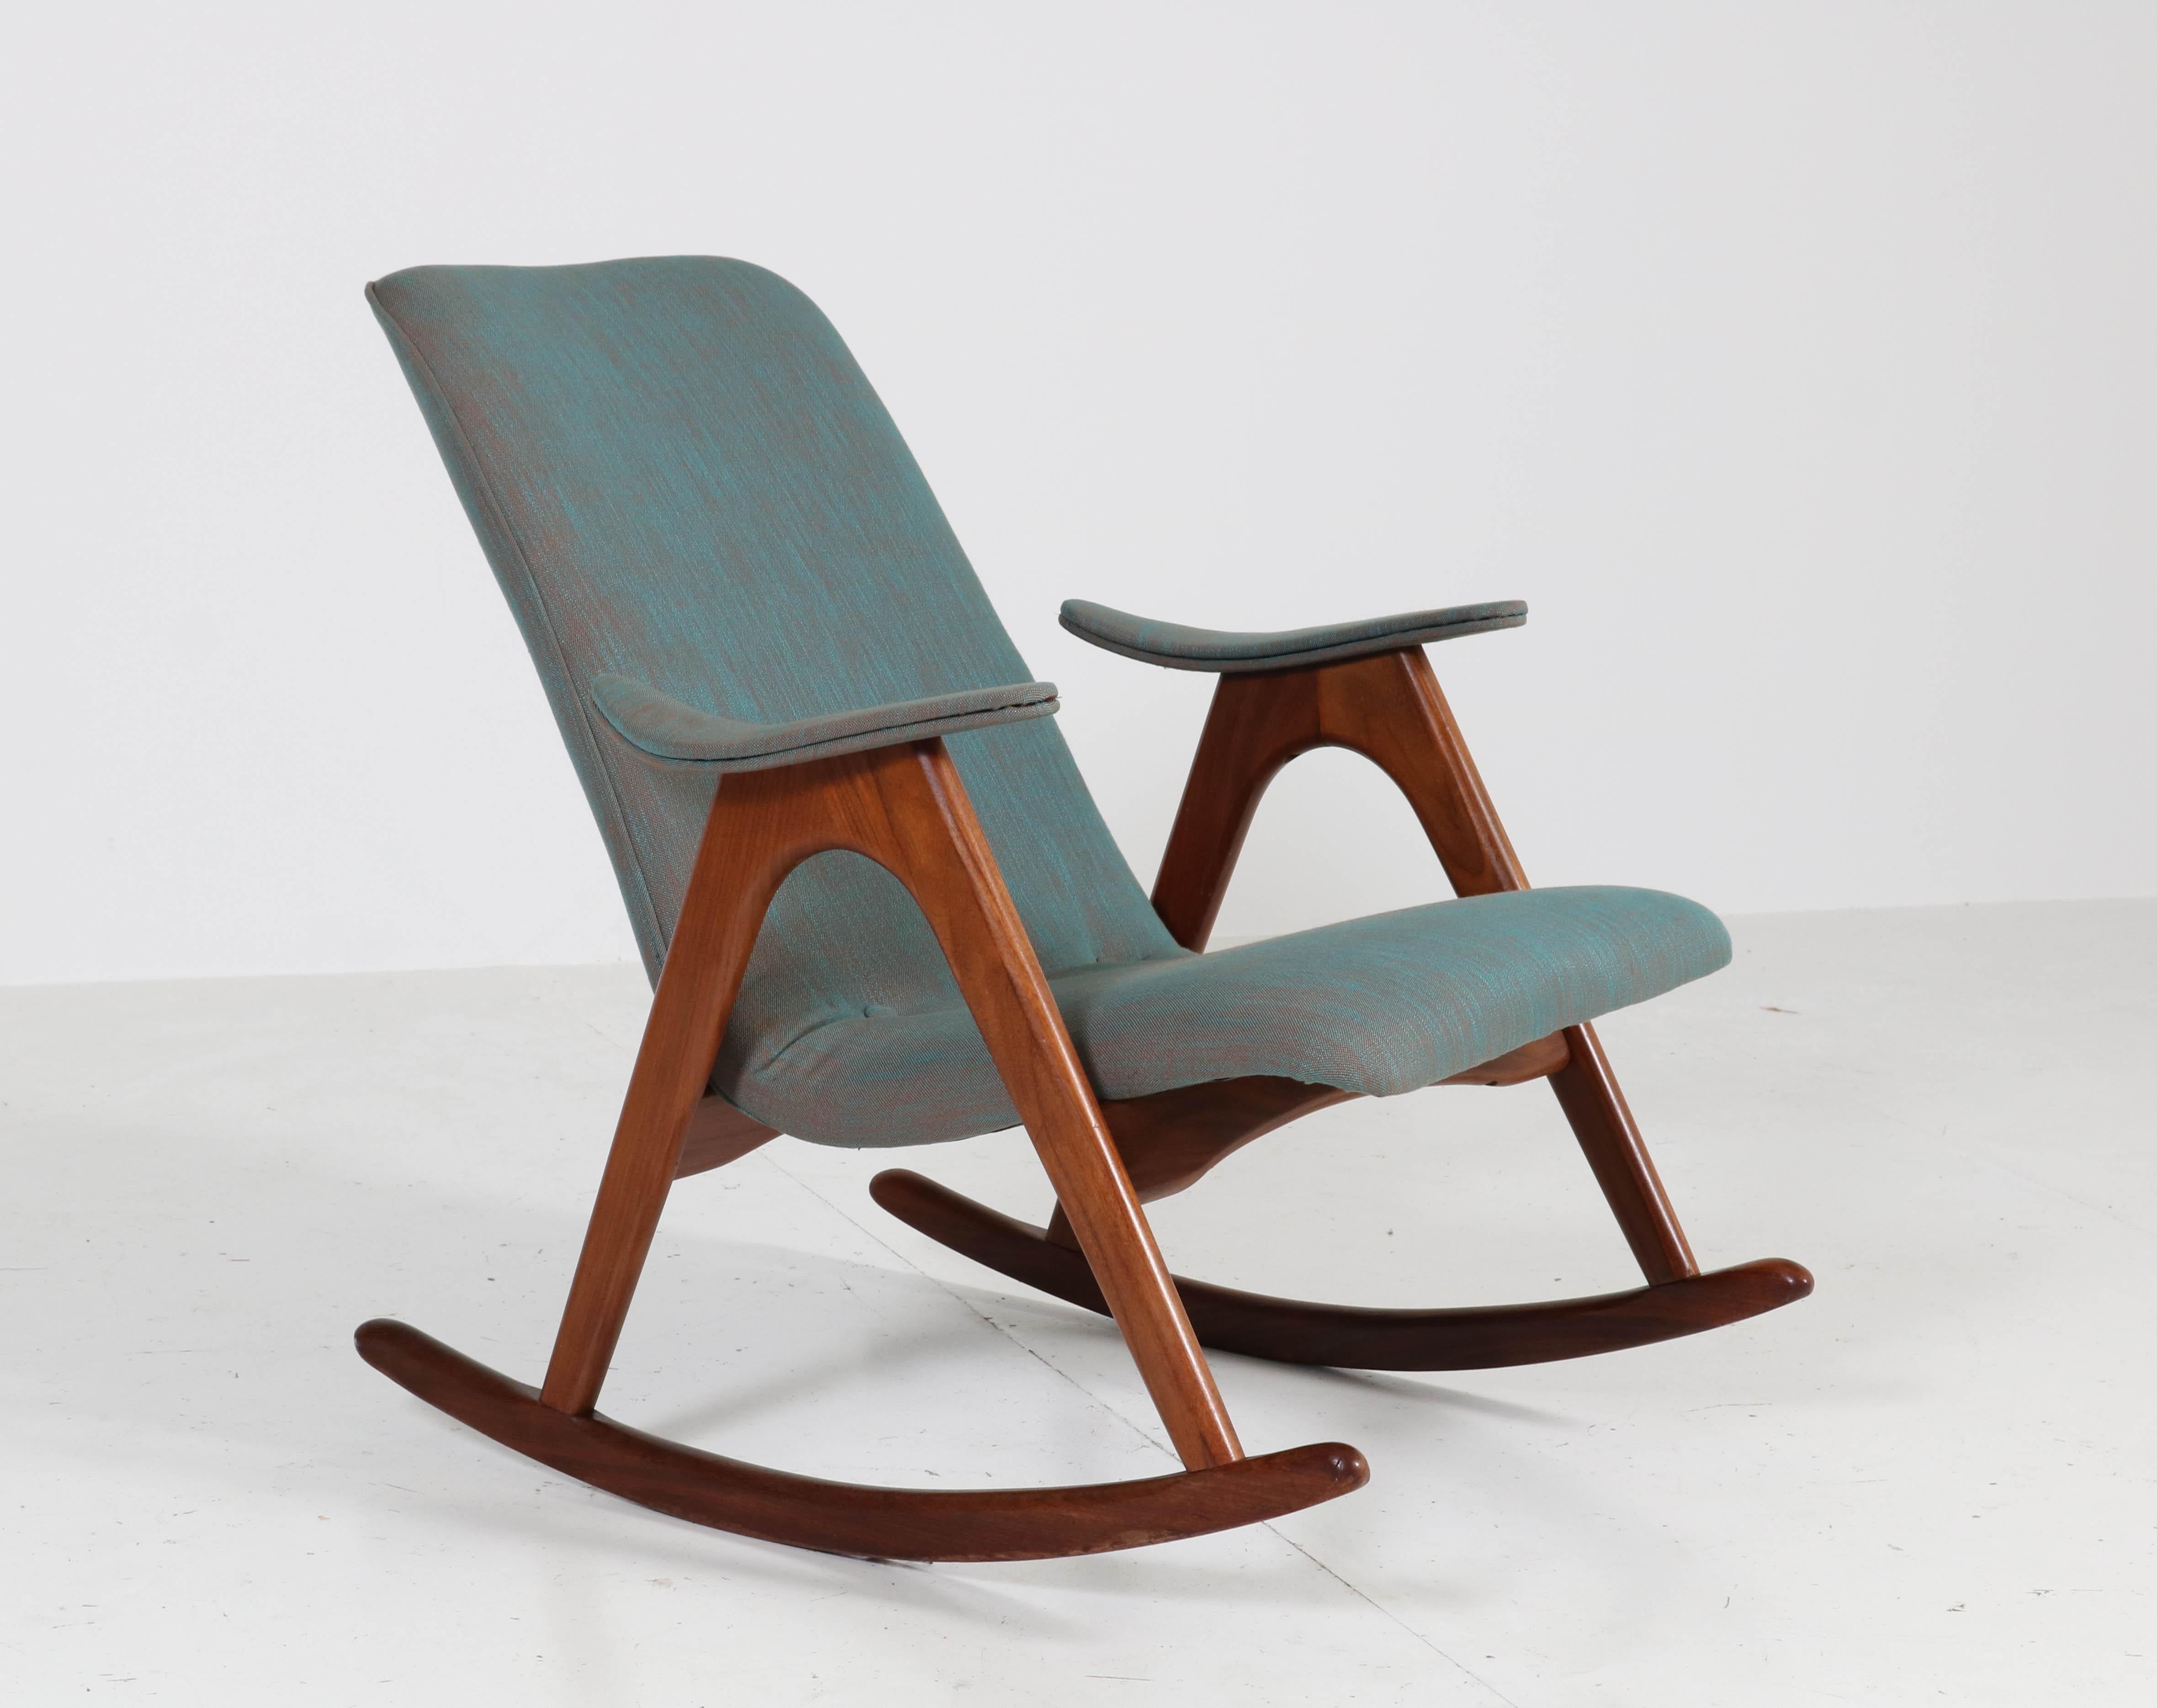 Wonderful Mid-Century Modern rocking chair.
Design by Louis Van Teeffelen for Webe.
Striking Dutch design from the 1960s.
Solid teak frame and re-upholstered with quality Italian fabric.
In very good condition with minor wear consistent with age